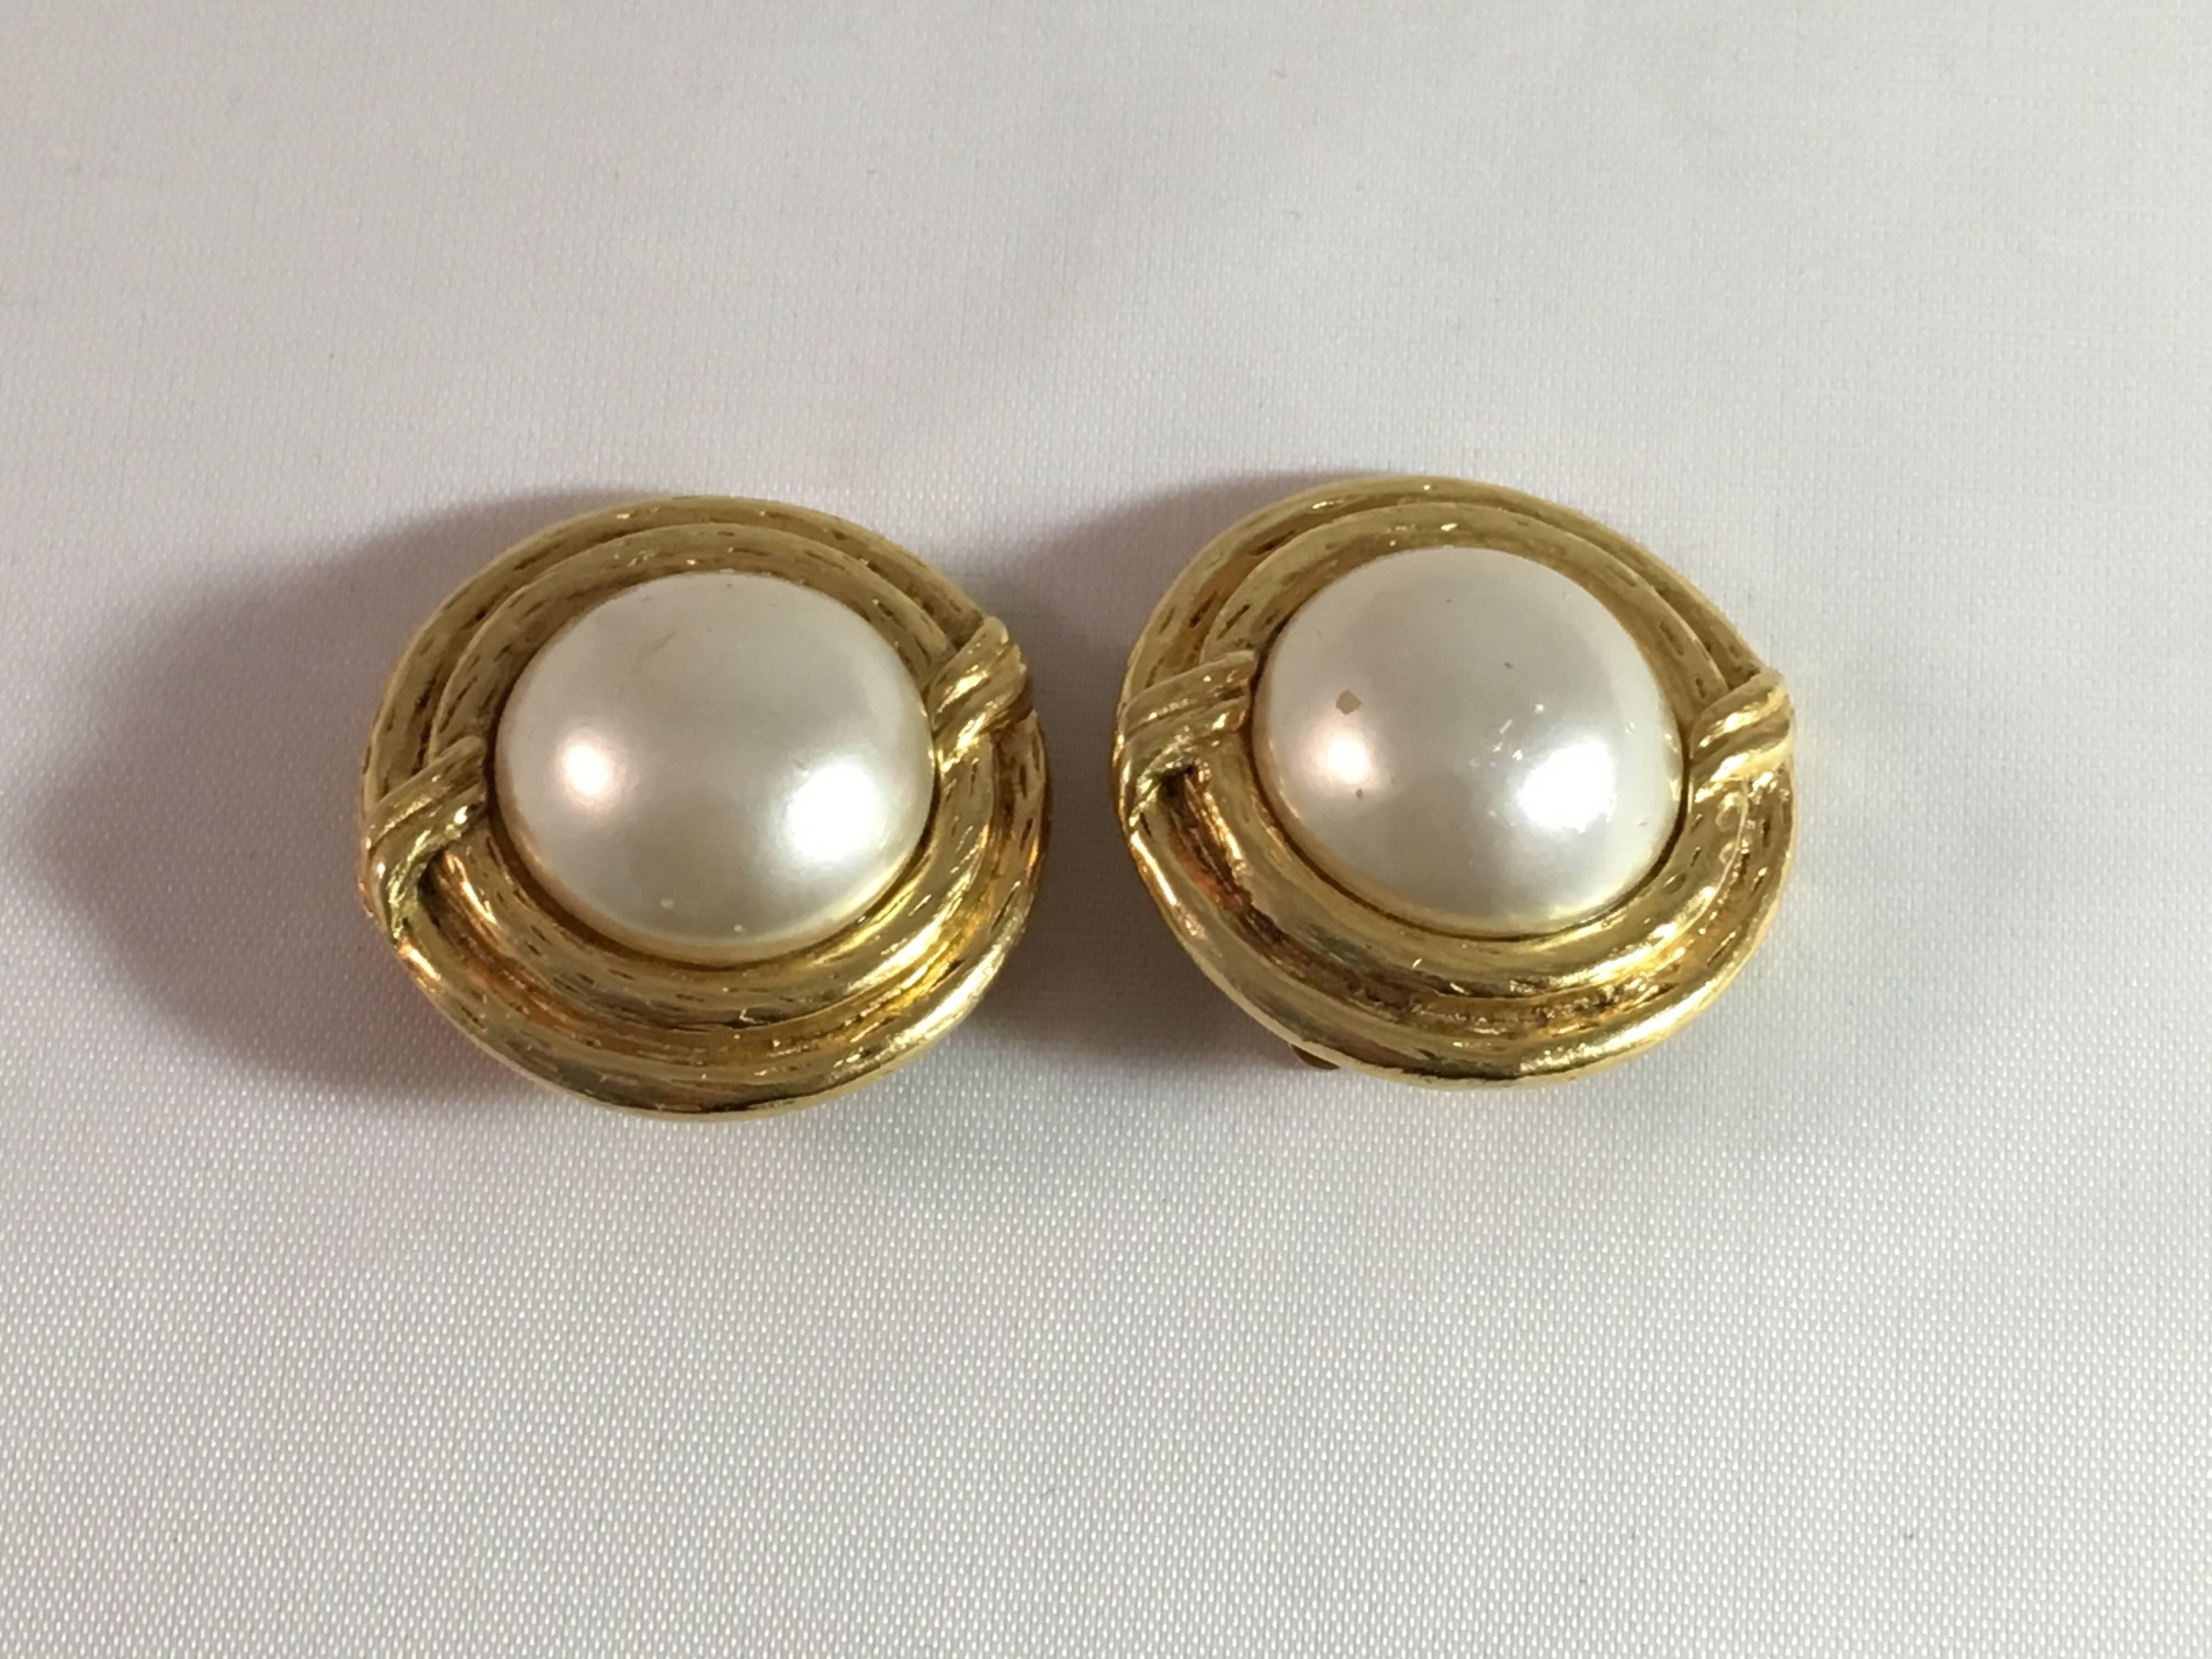 Beautifully made, early 1980's or late 1970s Chanel pearl and goldtone clip-on earrings. They feature a large faux pearl in the center and are signed on the back with a mark indicating (see image 3) that they date to the late 1970s or early 1980s.